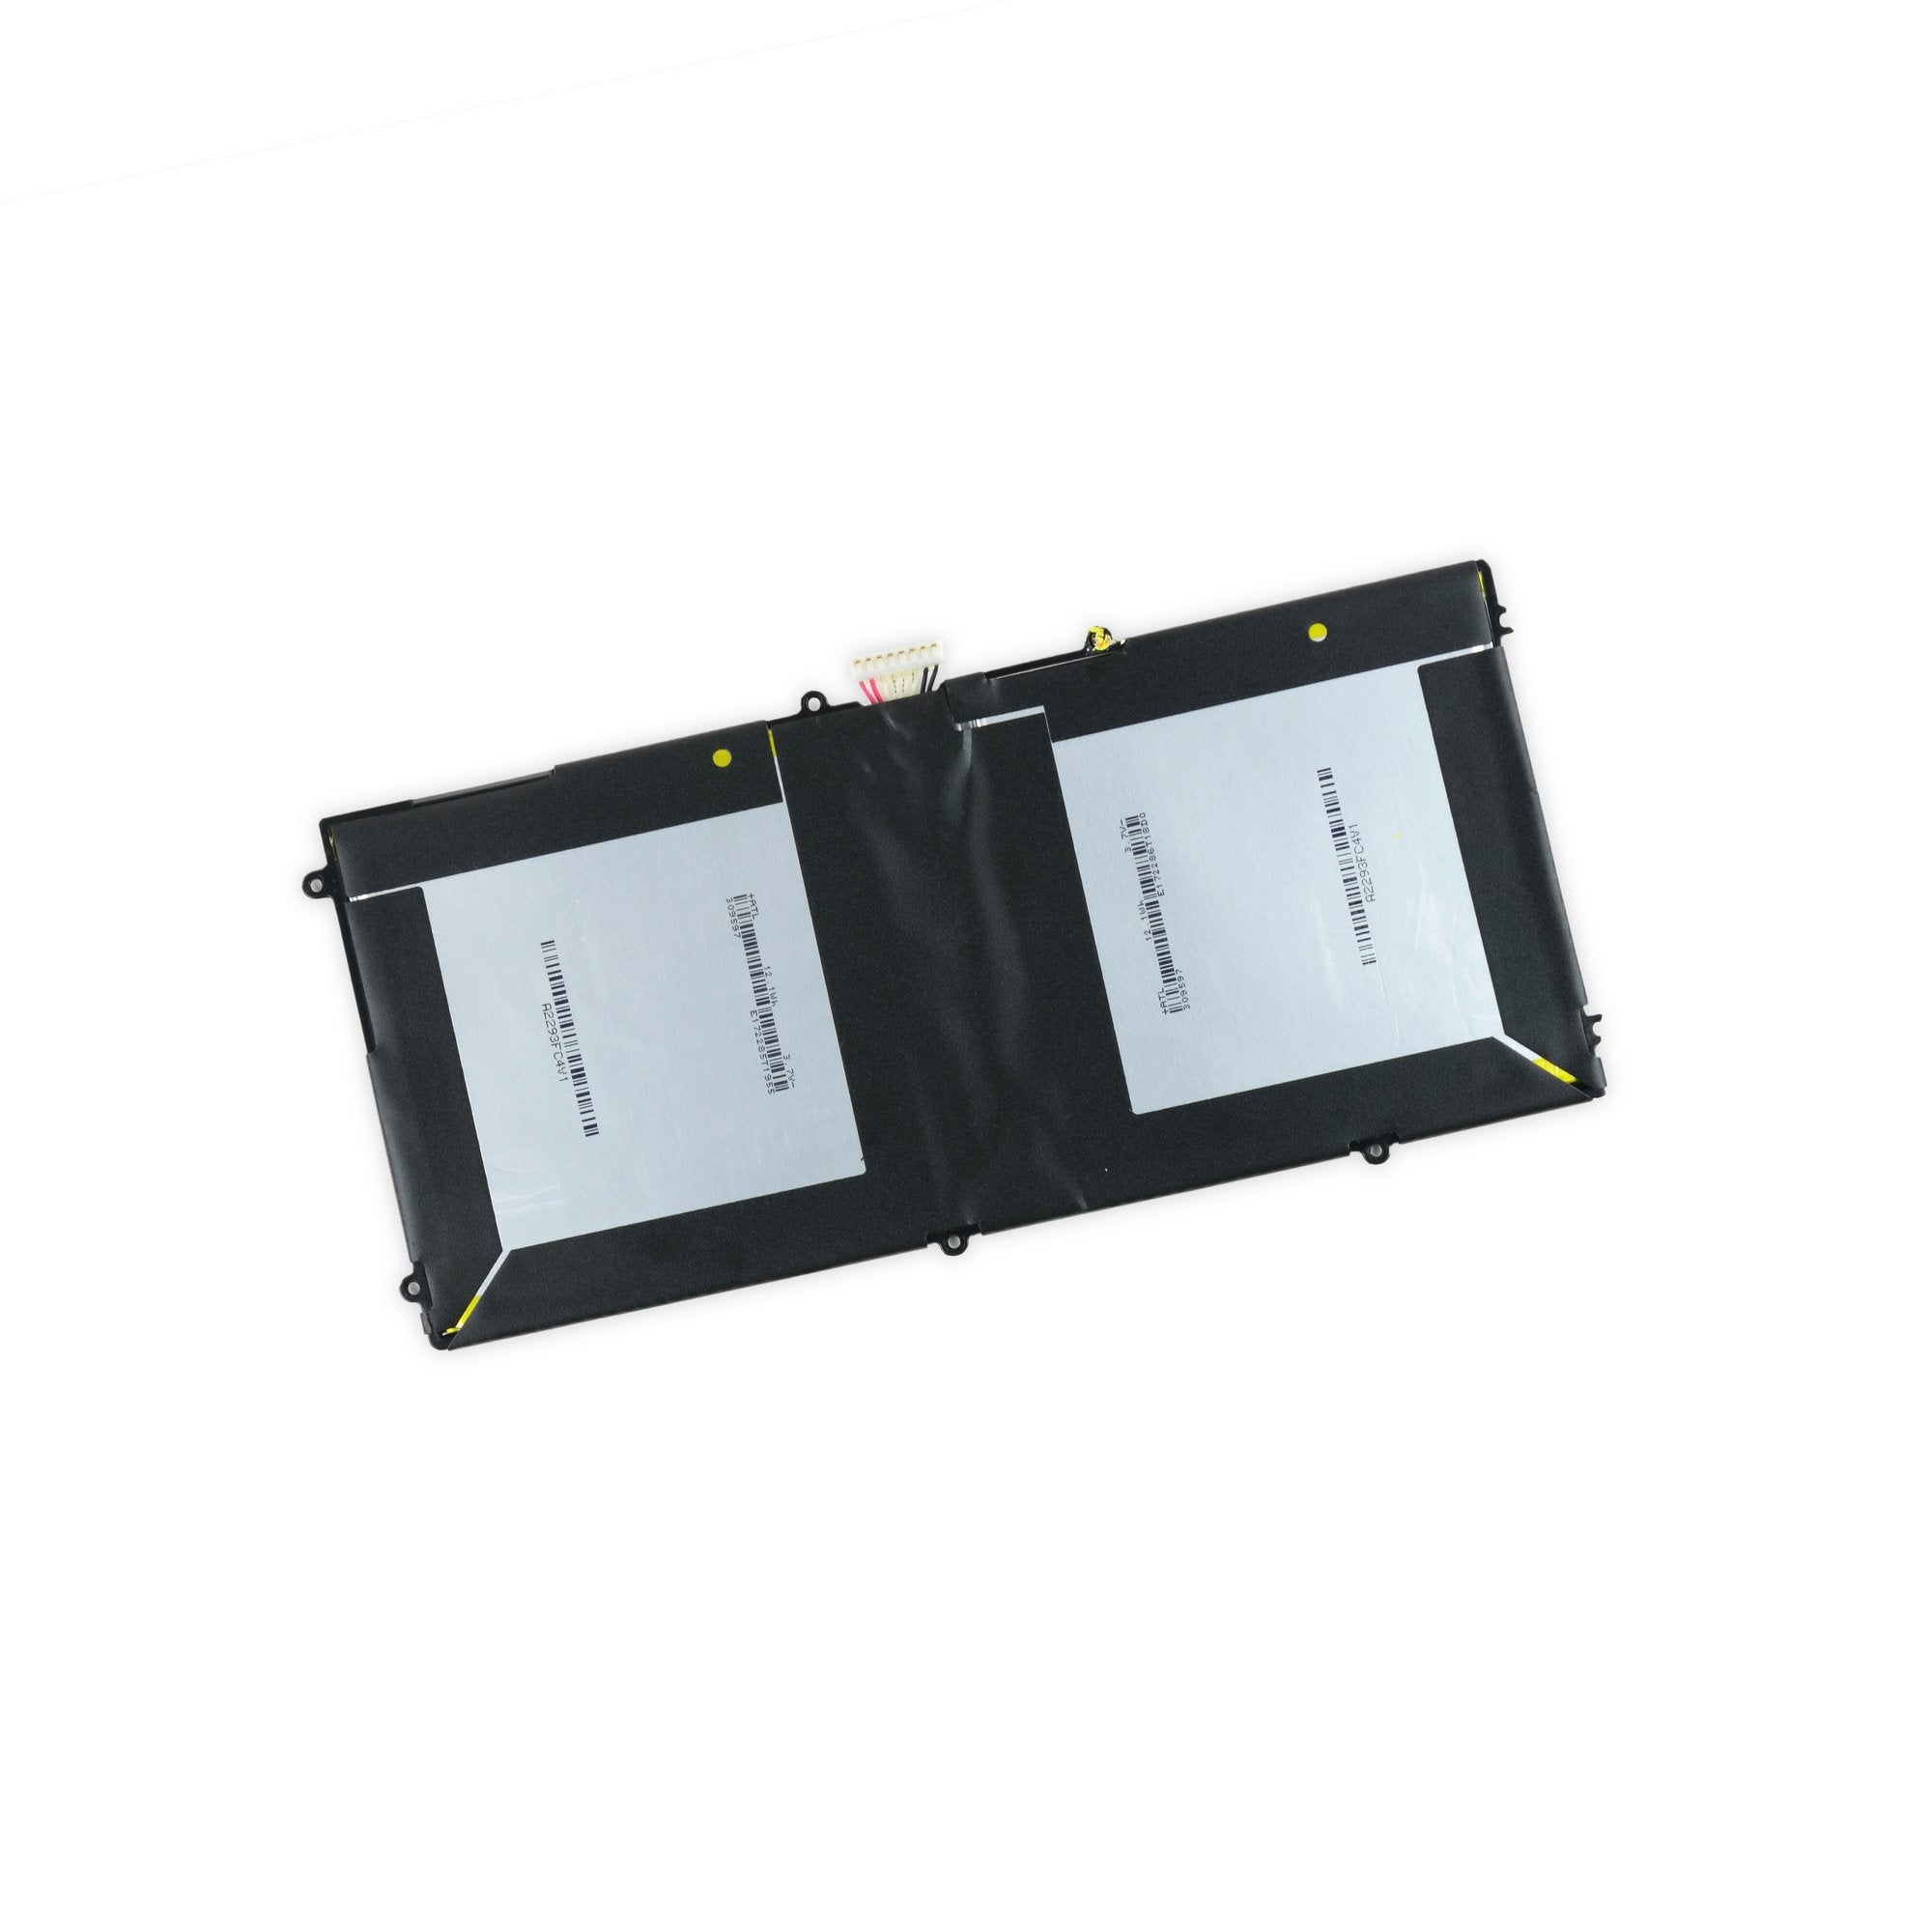 ASUS Transformer Pad Infinity (TF700T) Battery